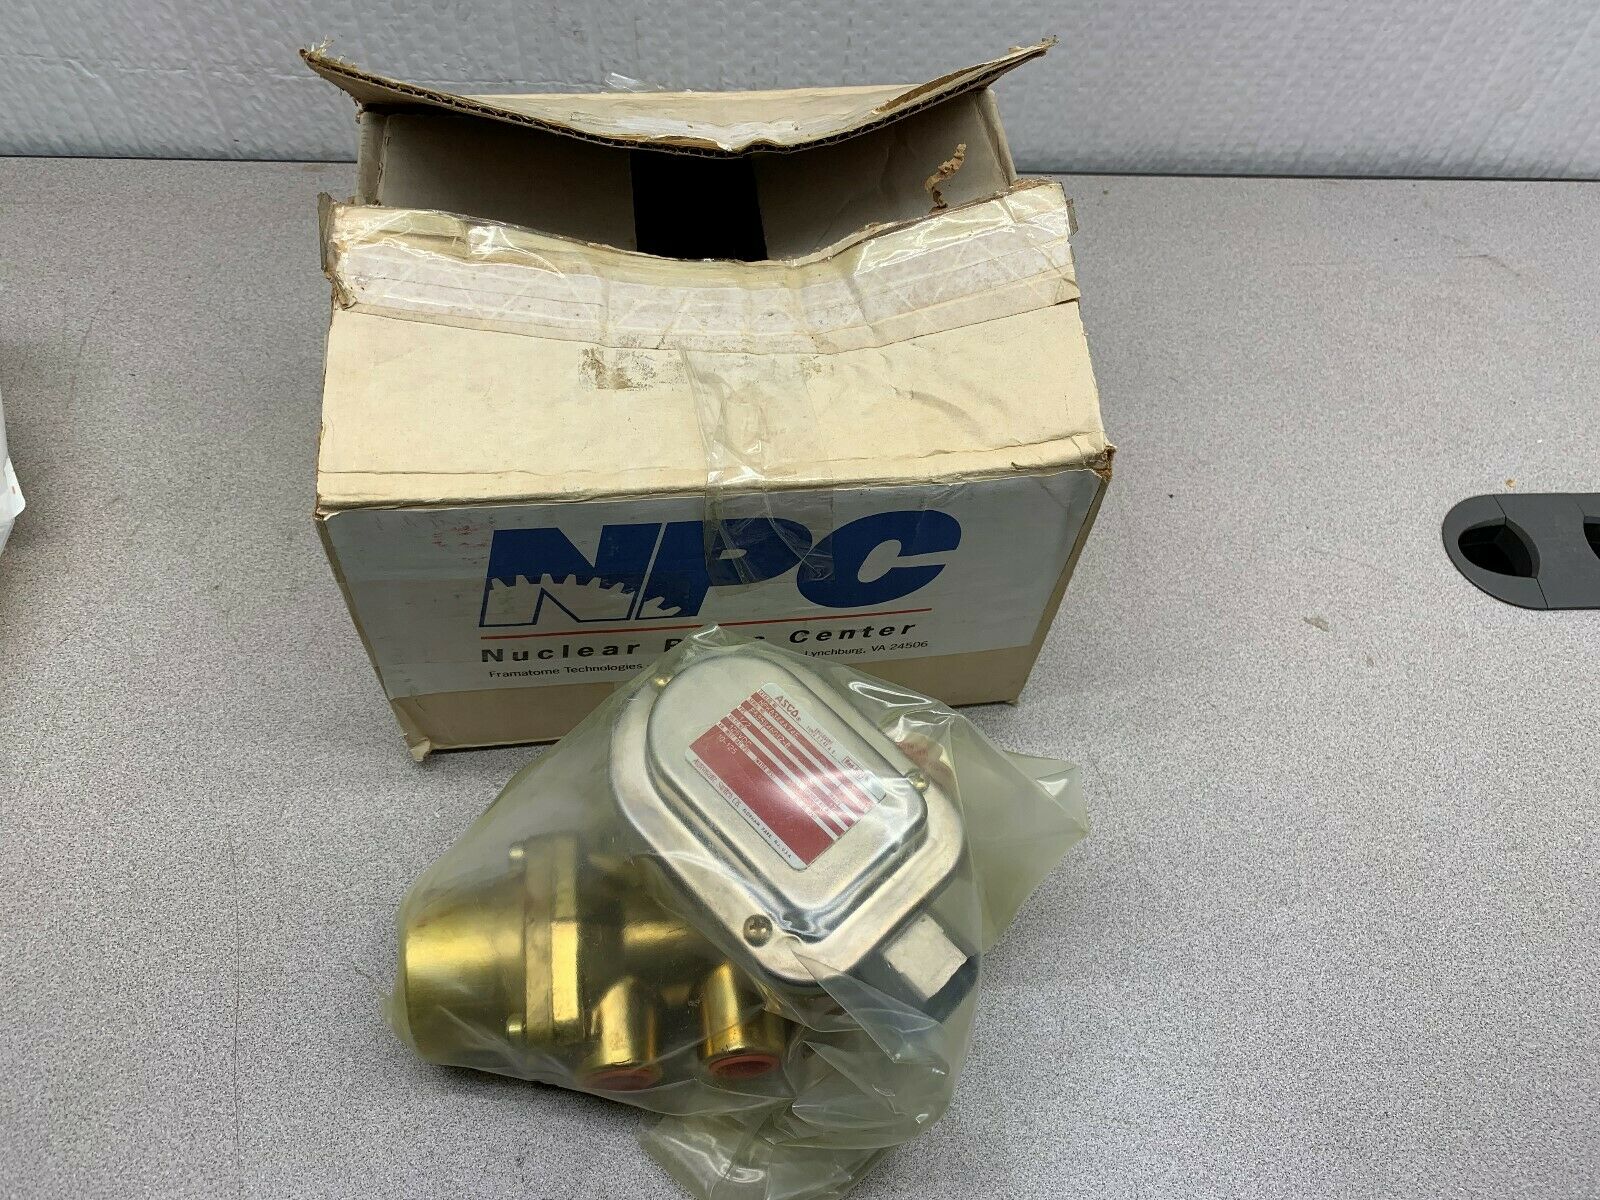 NEW ASCO RED HAT NUCLEAR SERIES 125VDC. SOLENOID VALVE 1/2" PIPE NPK8344A74E